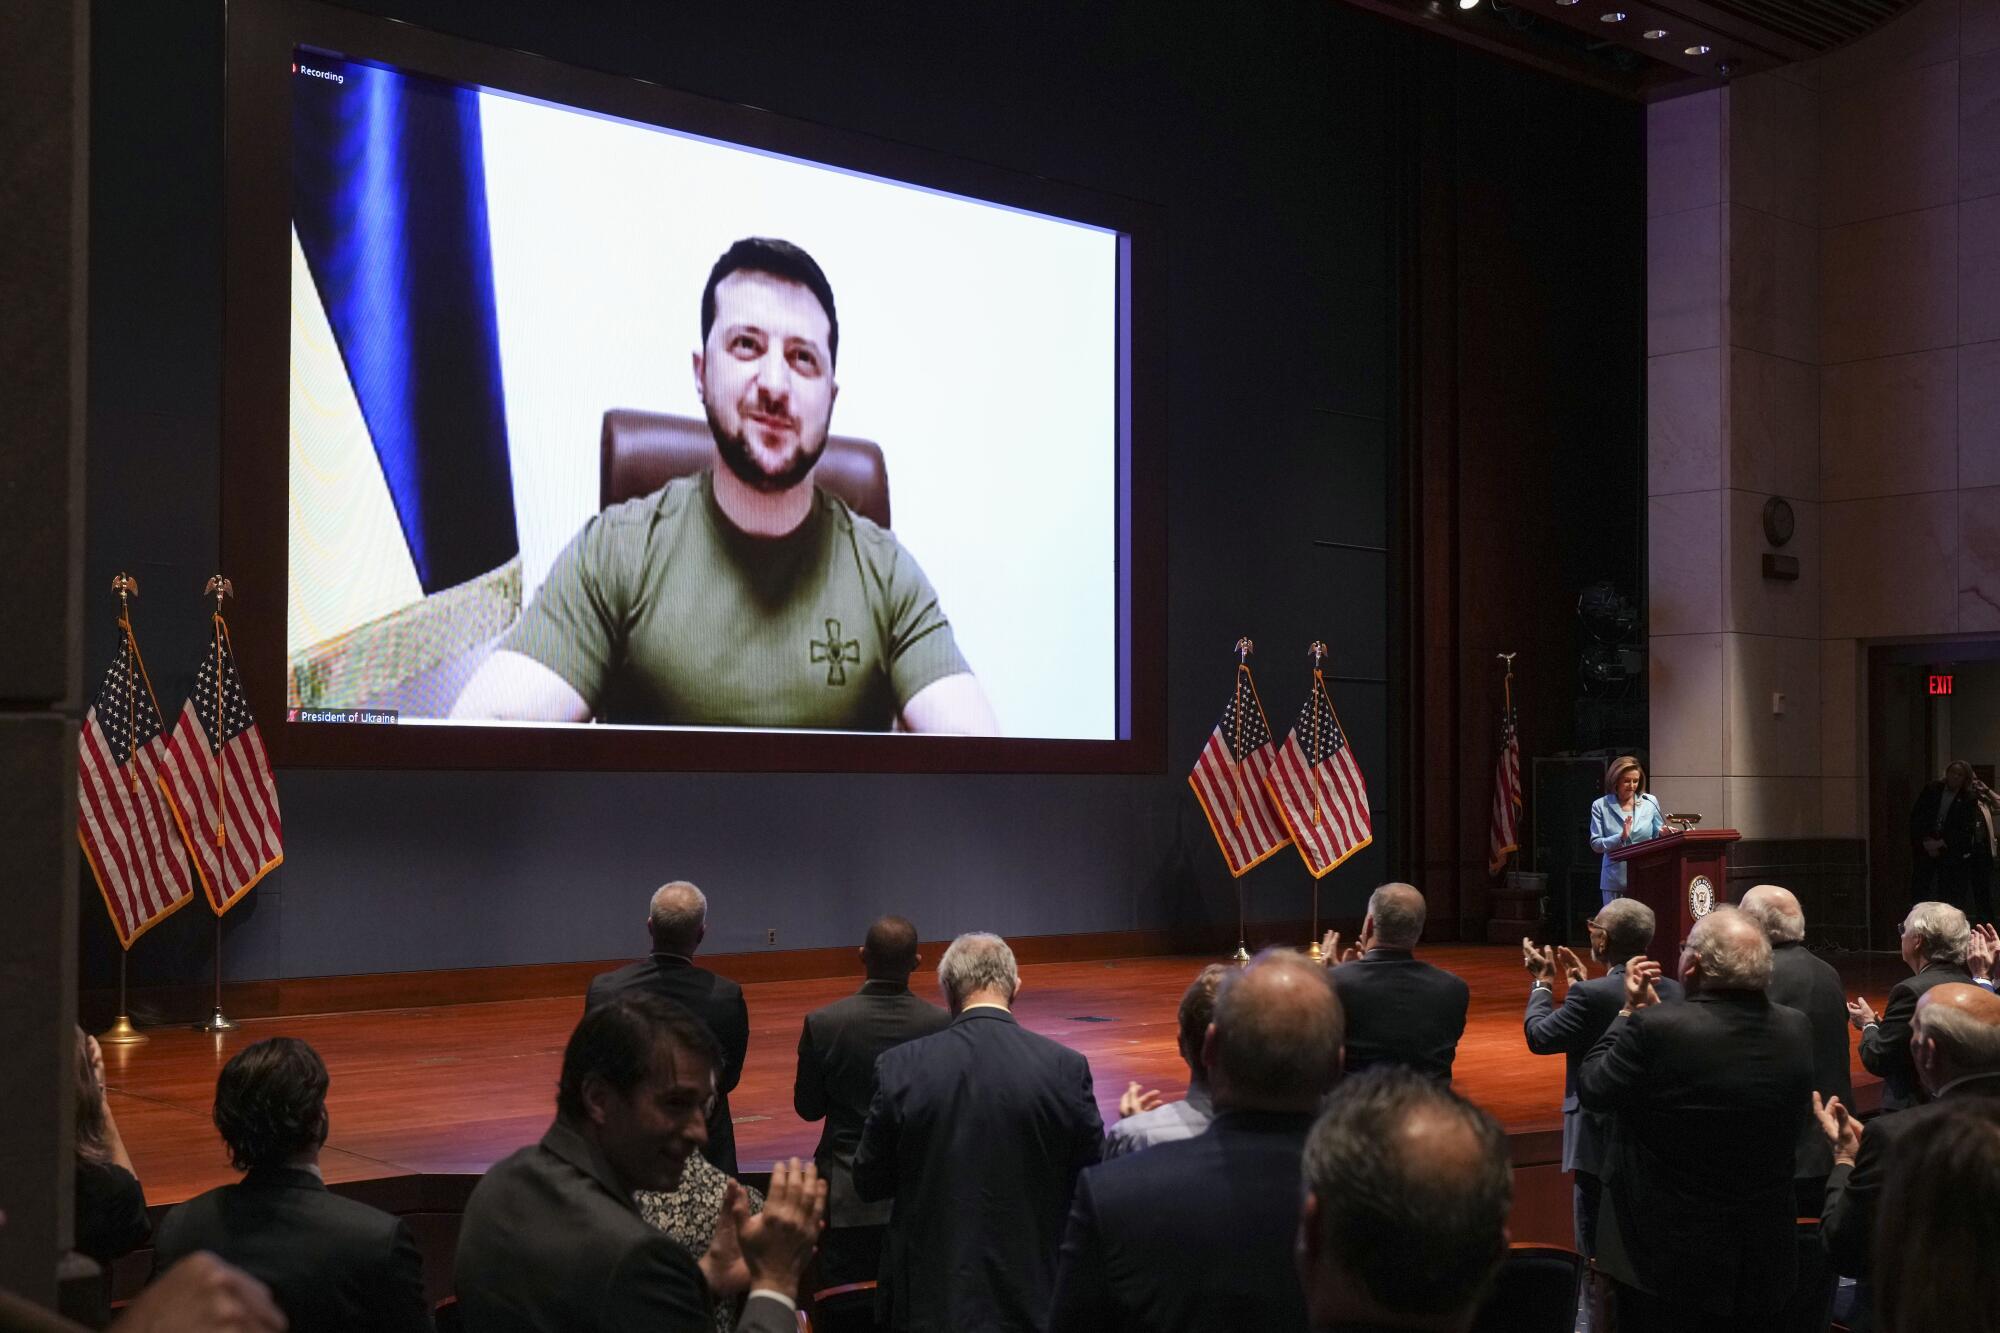 Ukraine President Volodymyr Zelensky looms large on a video screen as the U.S. Congress gives him a standing ovation.